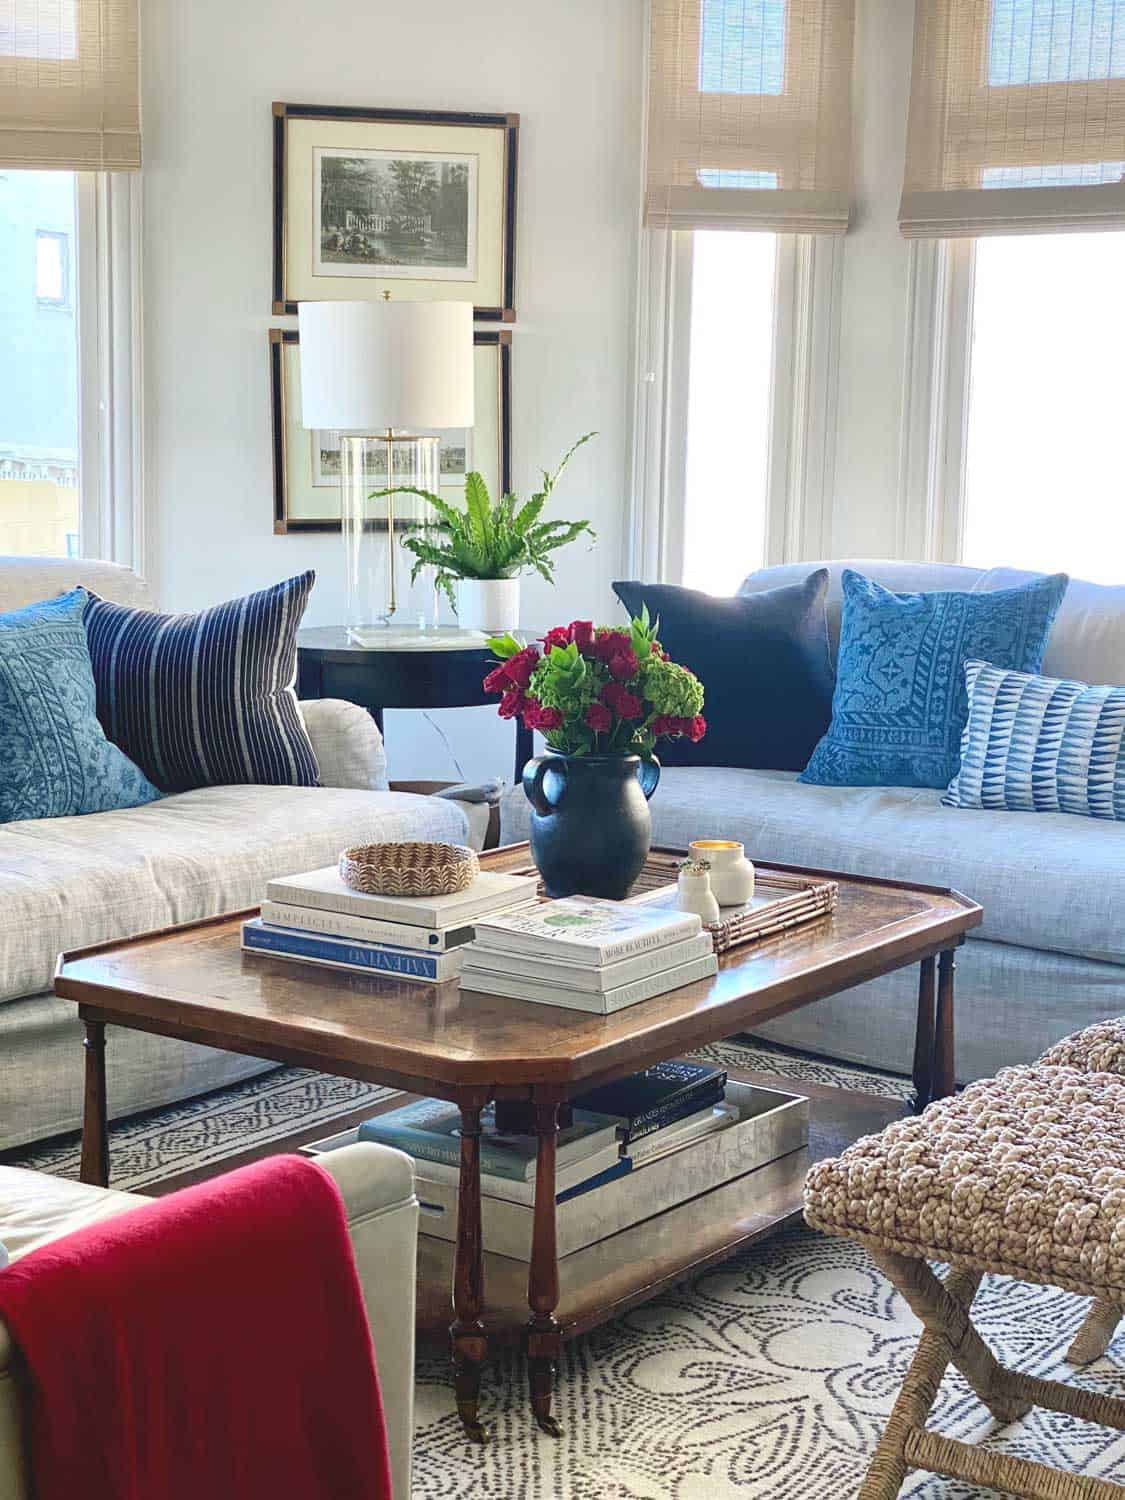 The San Francisco Living Room of decorator Mary Ann Pickett with touches of red